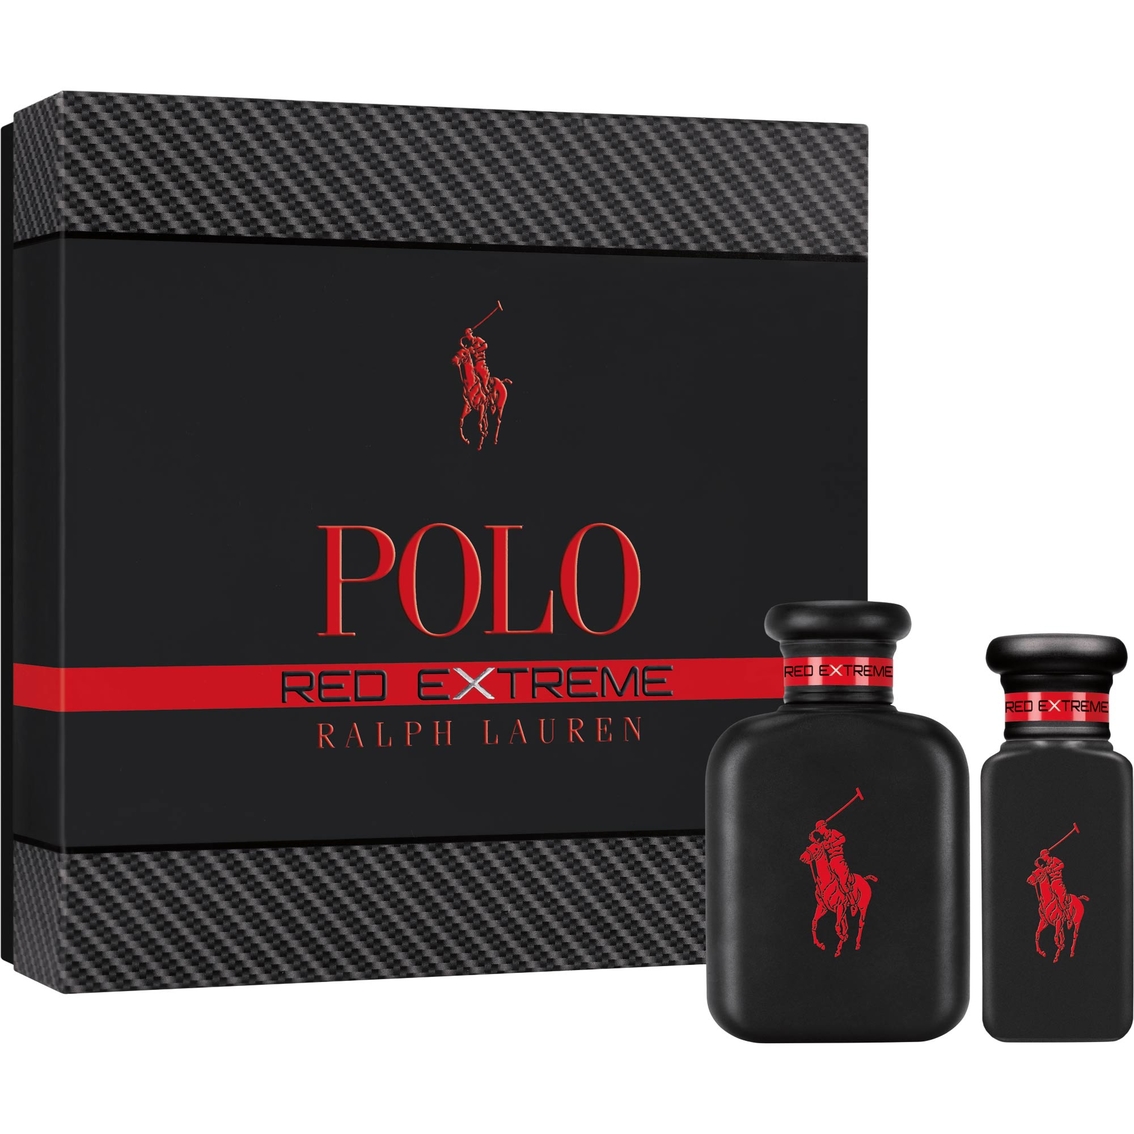 Ralph Lauren Polo Red Extreme 2 Pc. Gift Set | Gifts Sets For Him ...